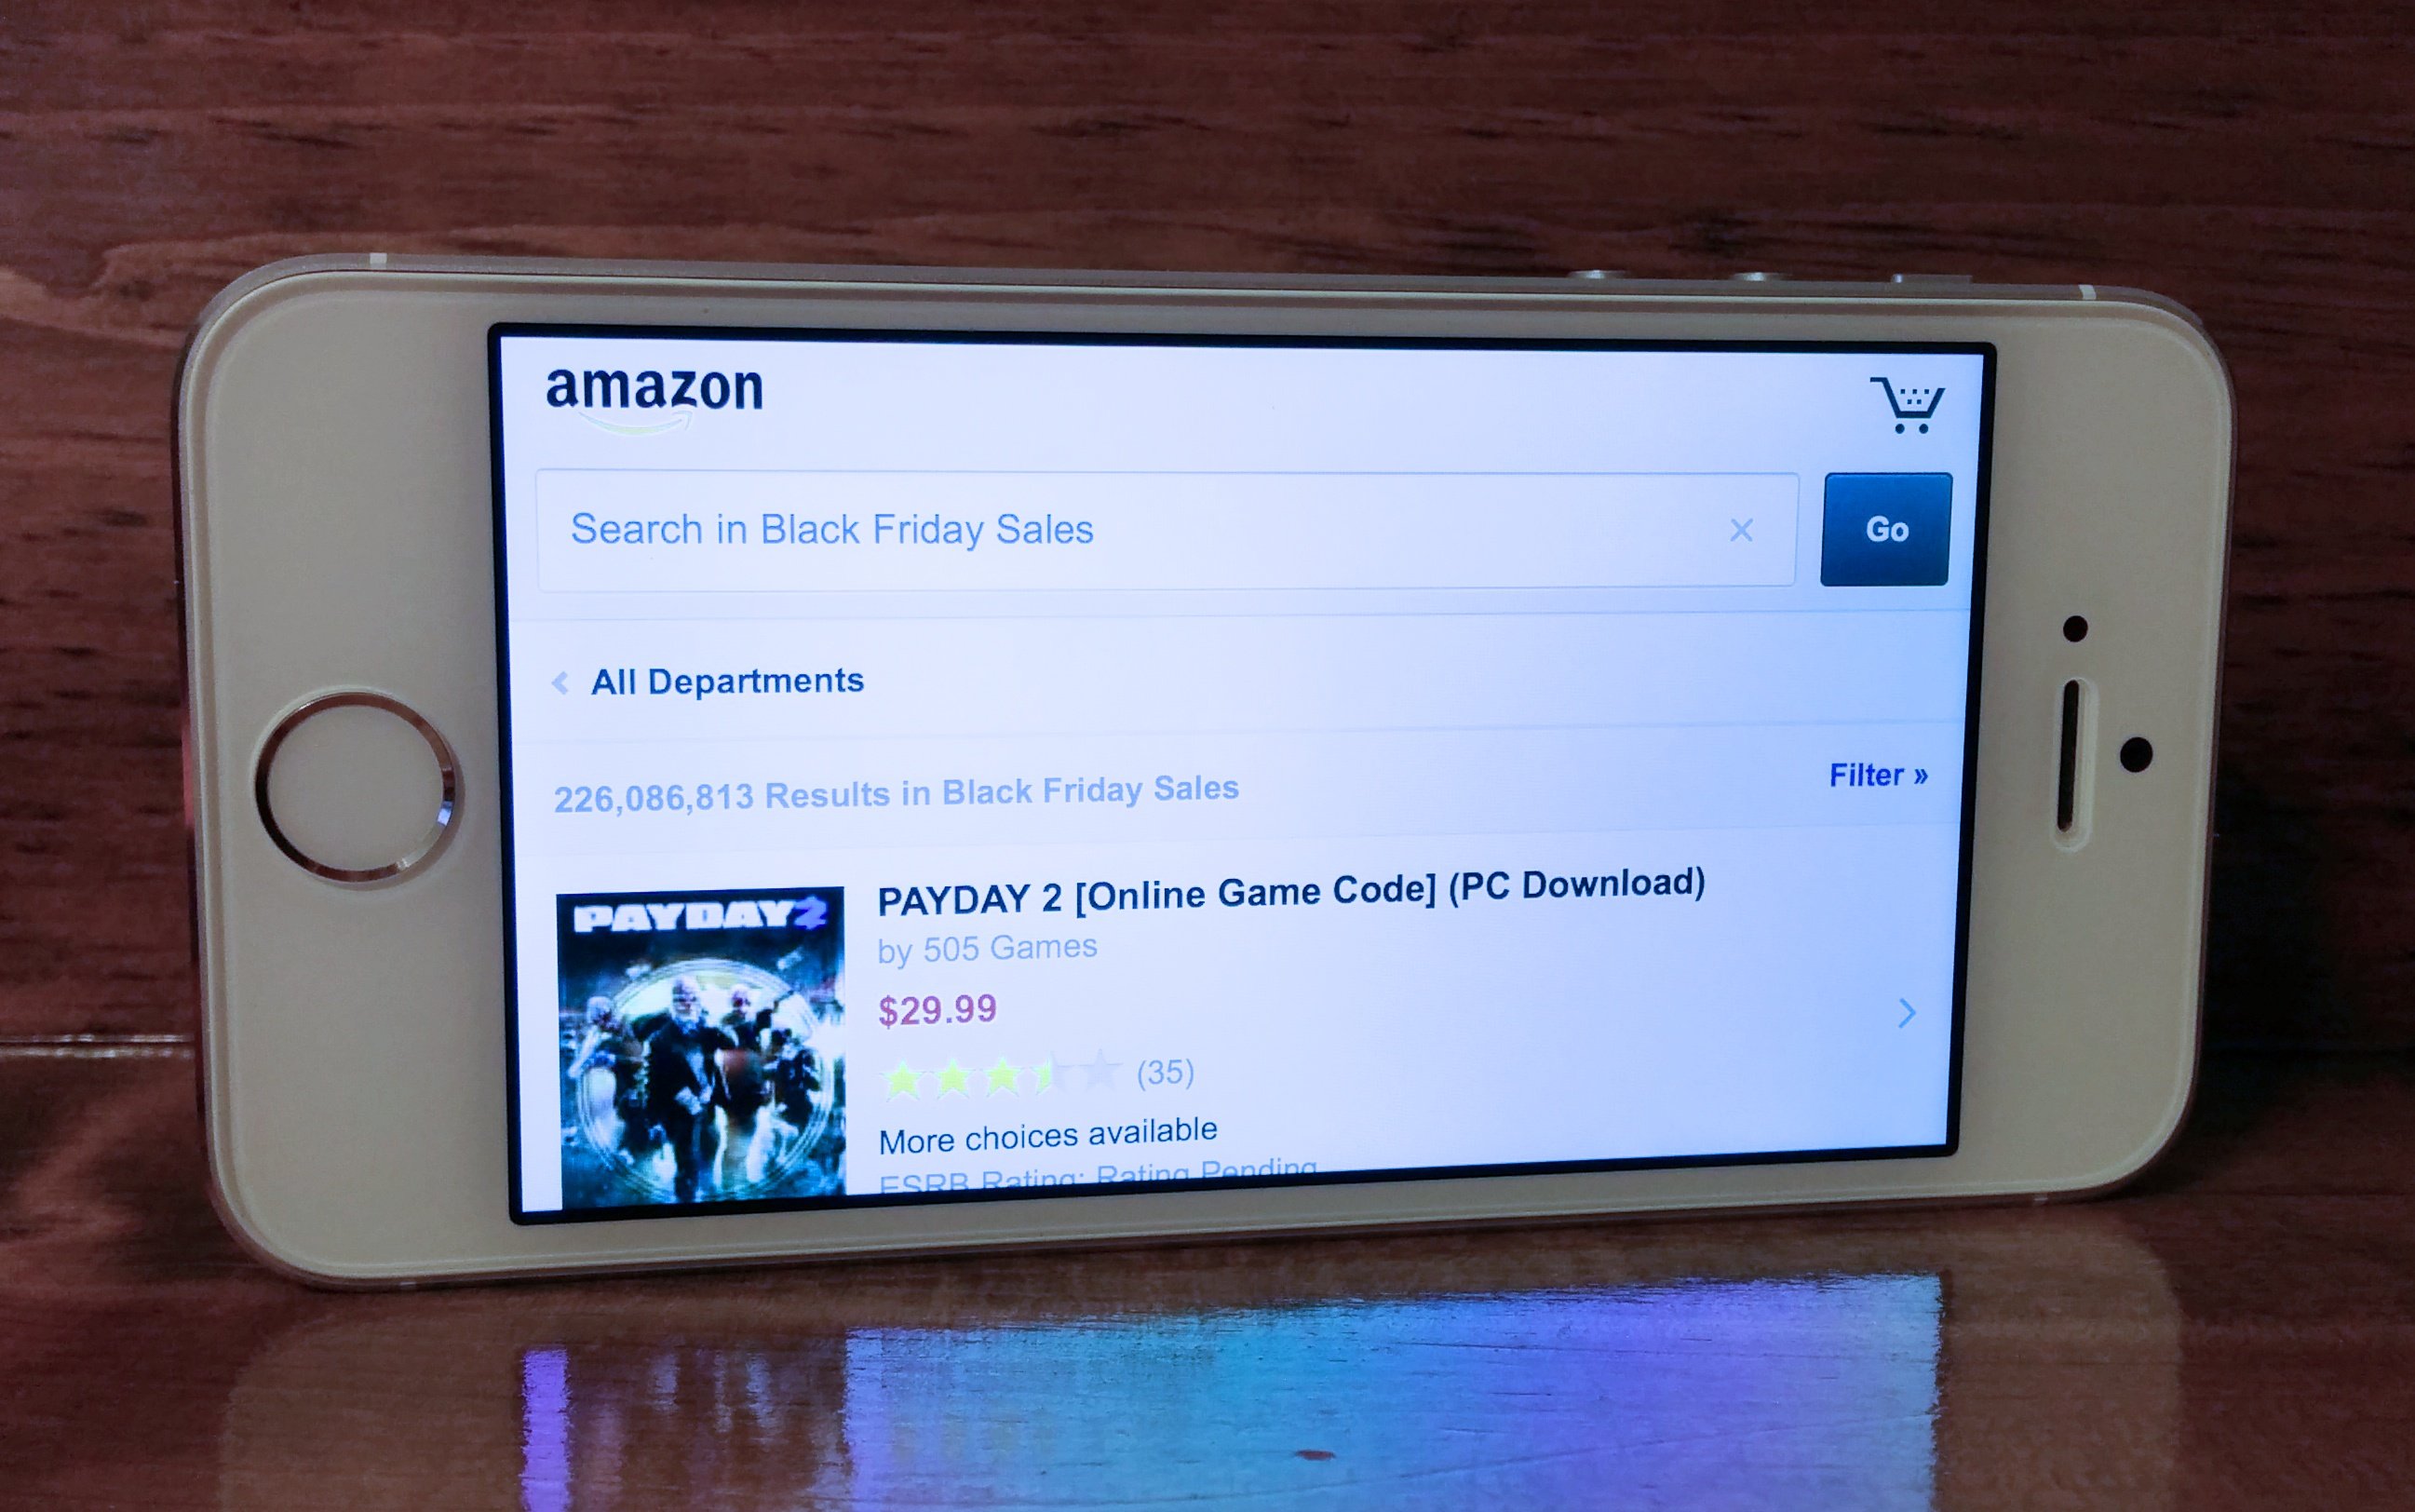 The Amazon Black Friday 2013 deals are here, and it's just the start.